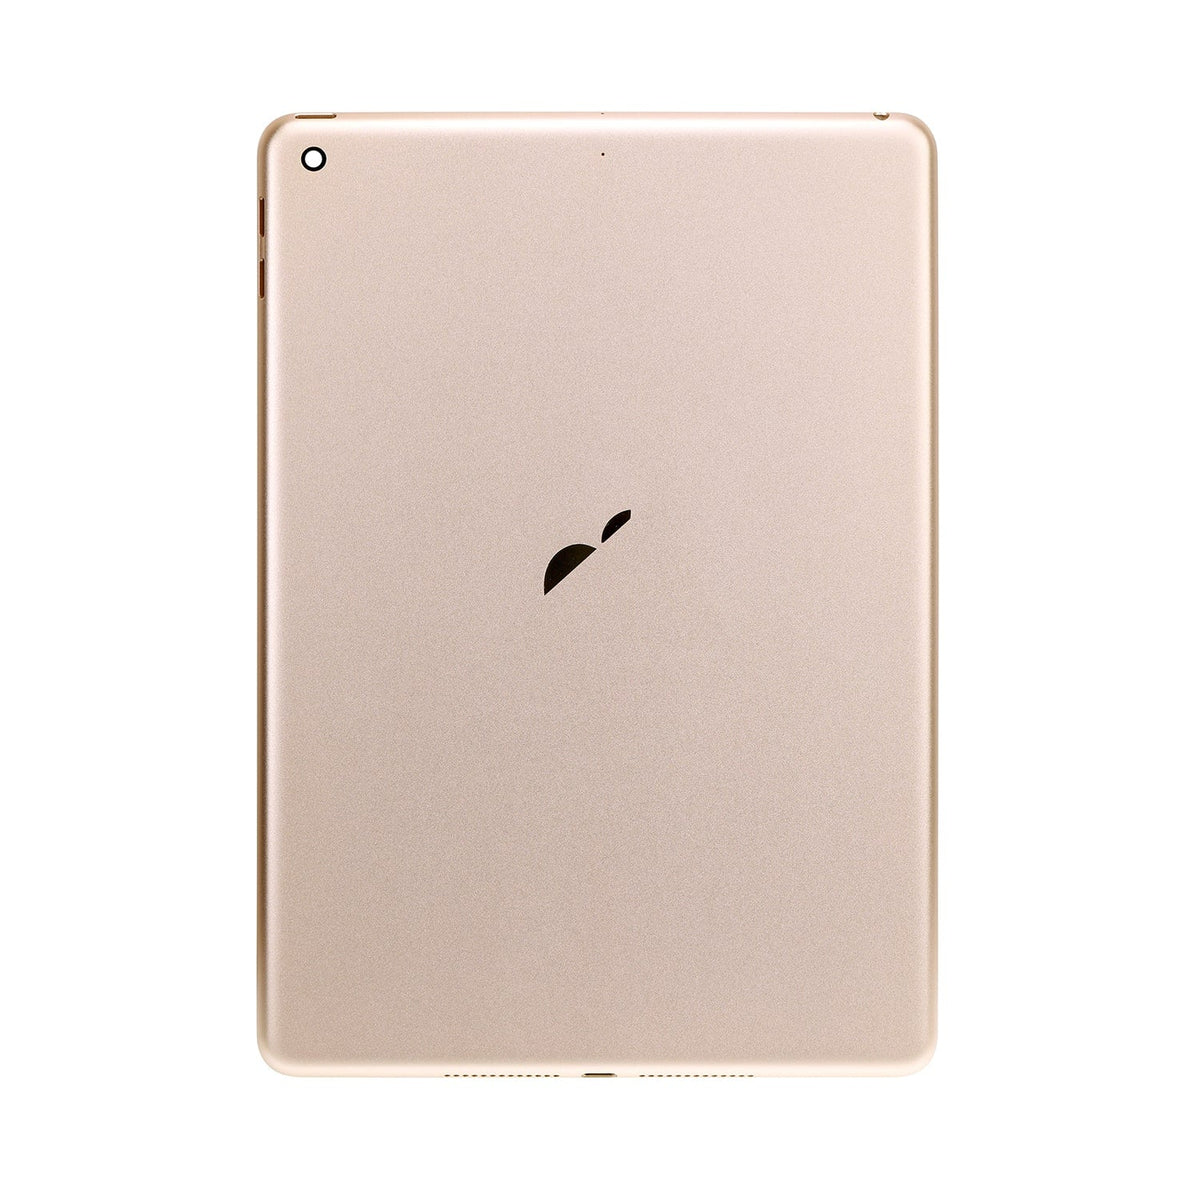 GOLD BACK COVER (WIFI VERSION ) FOR IPAD 5